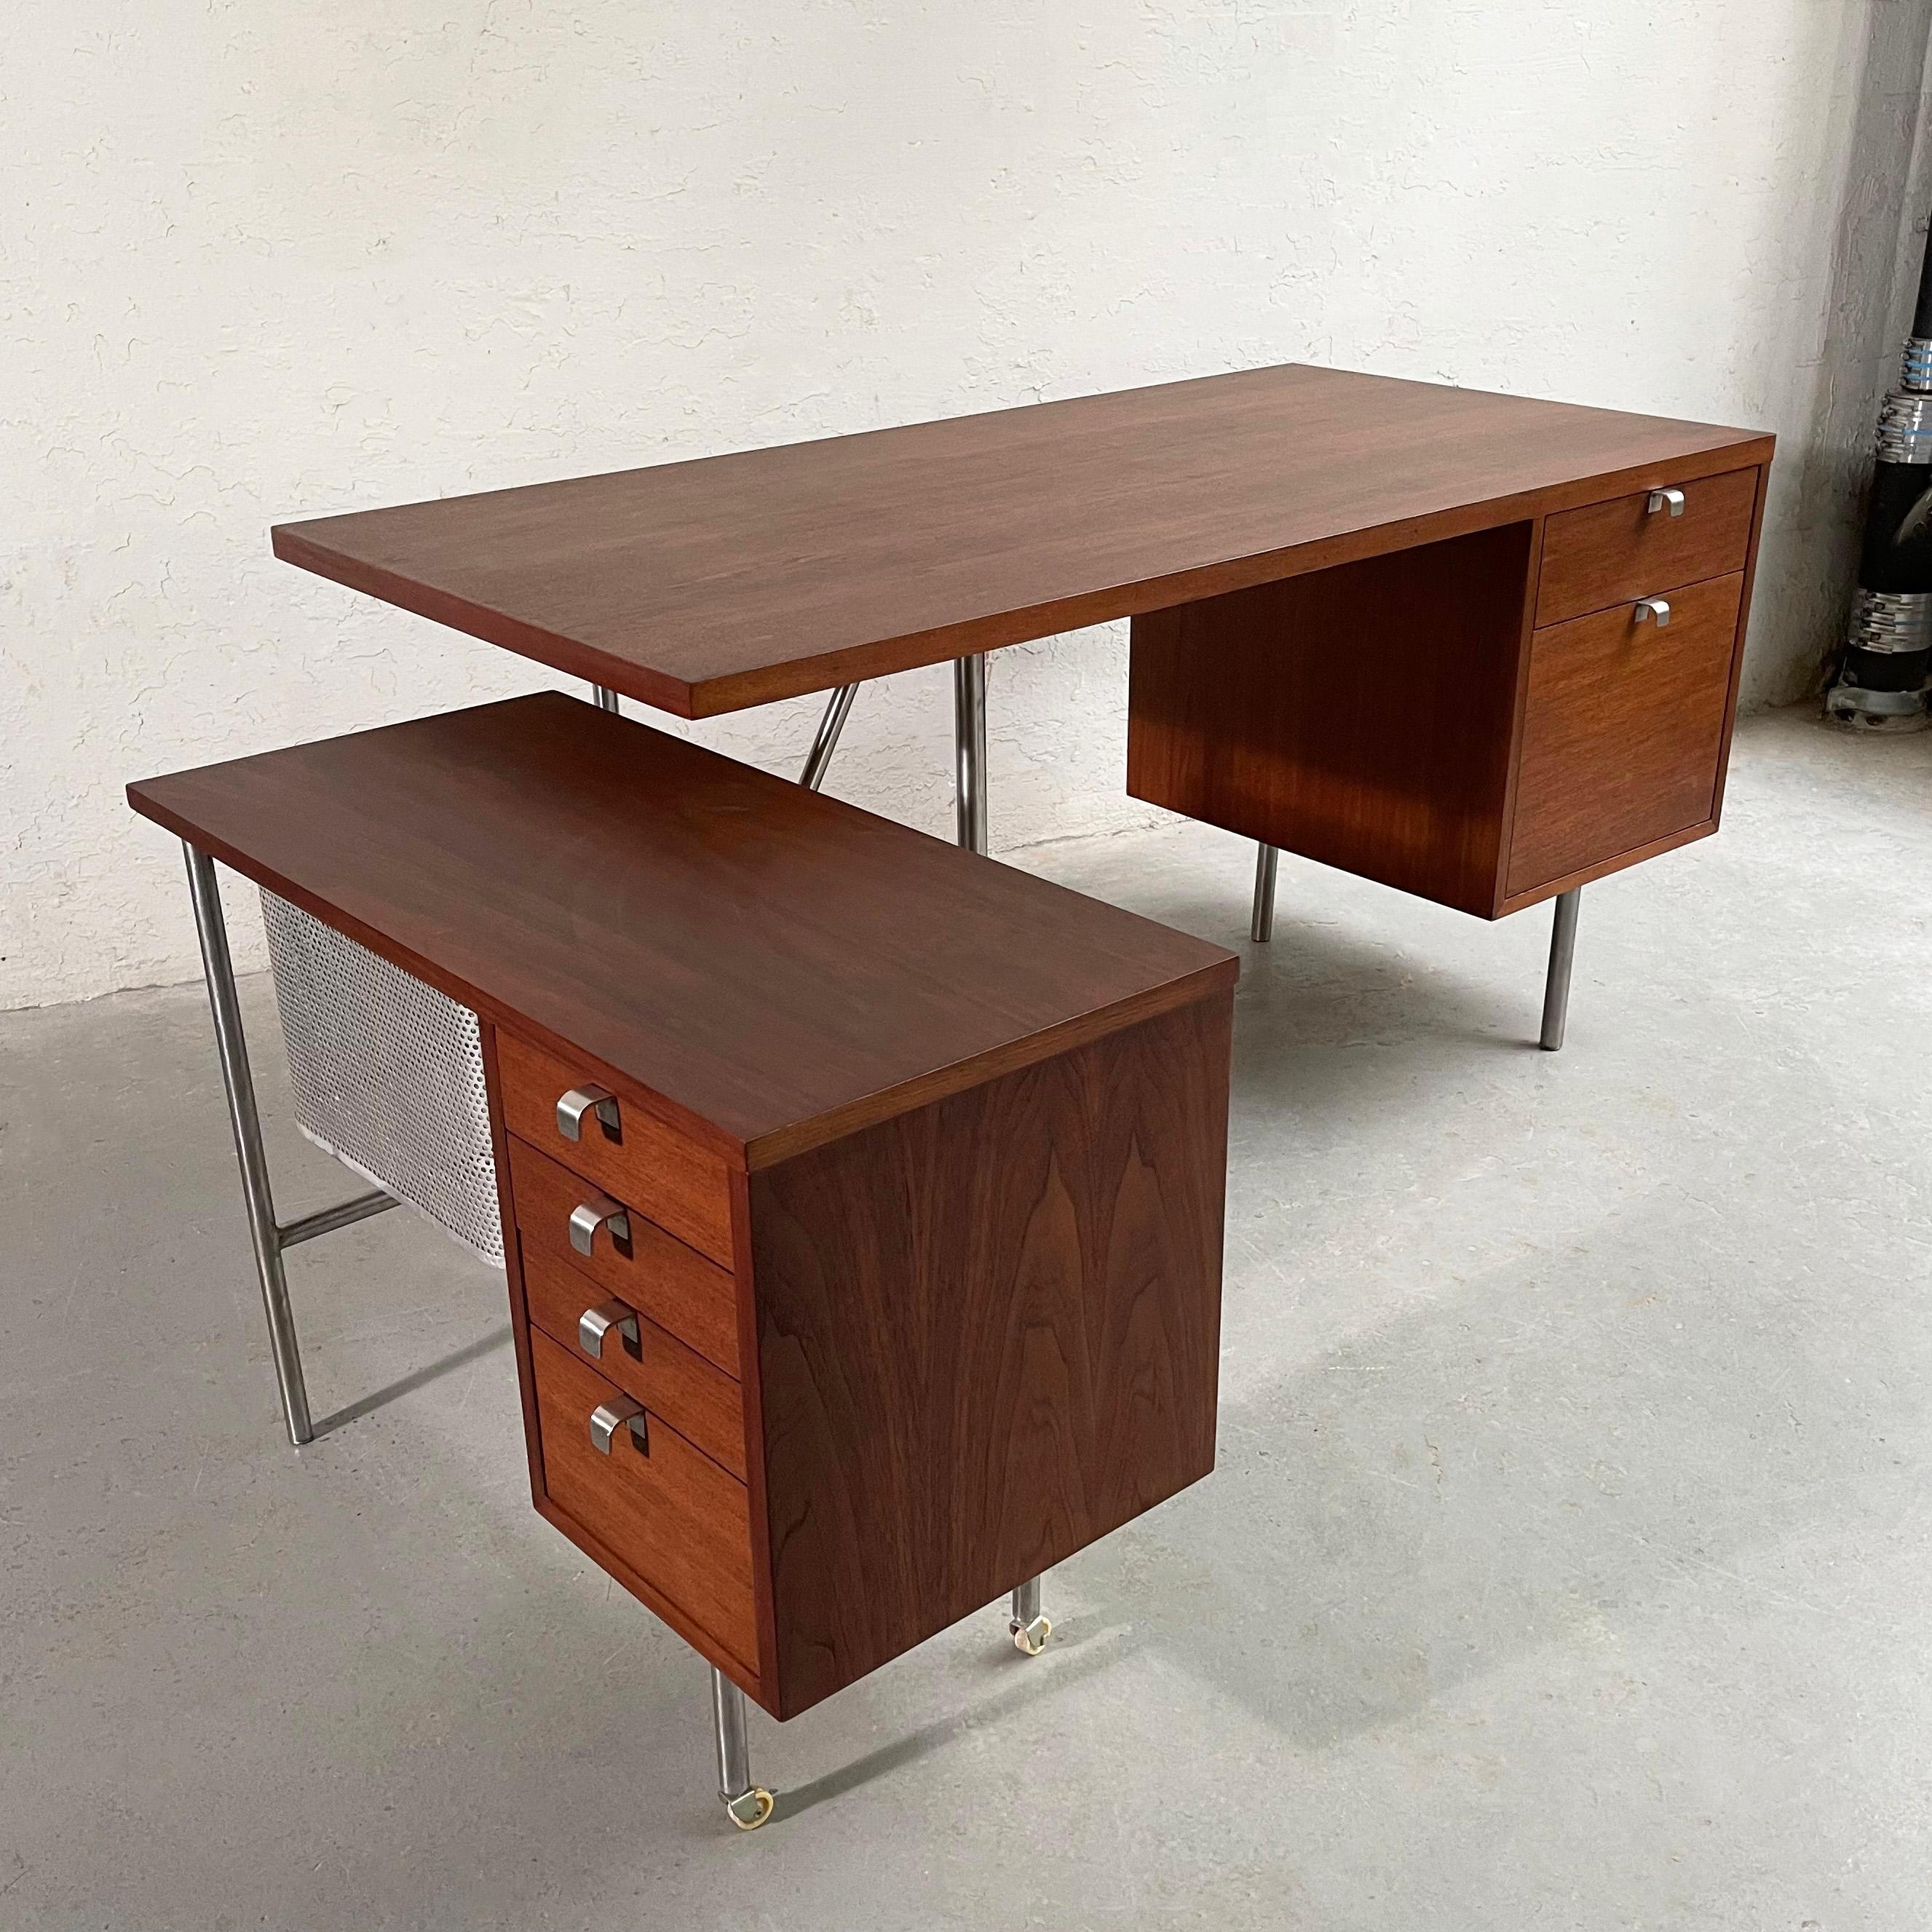 Mid-Century Modern, Executive Office Group desk model 9959 and typewriter return desk model 4751 by George Nelson for Herman Miller features a dark walnut finish with steel legs, aluminum J pulls and pull-out mesh file folder basket. The chair